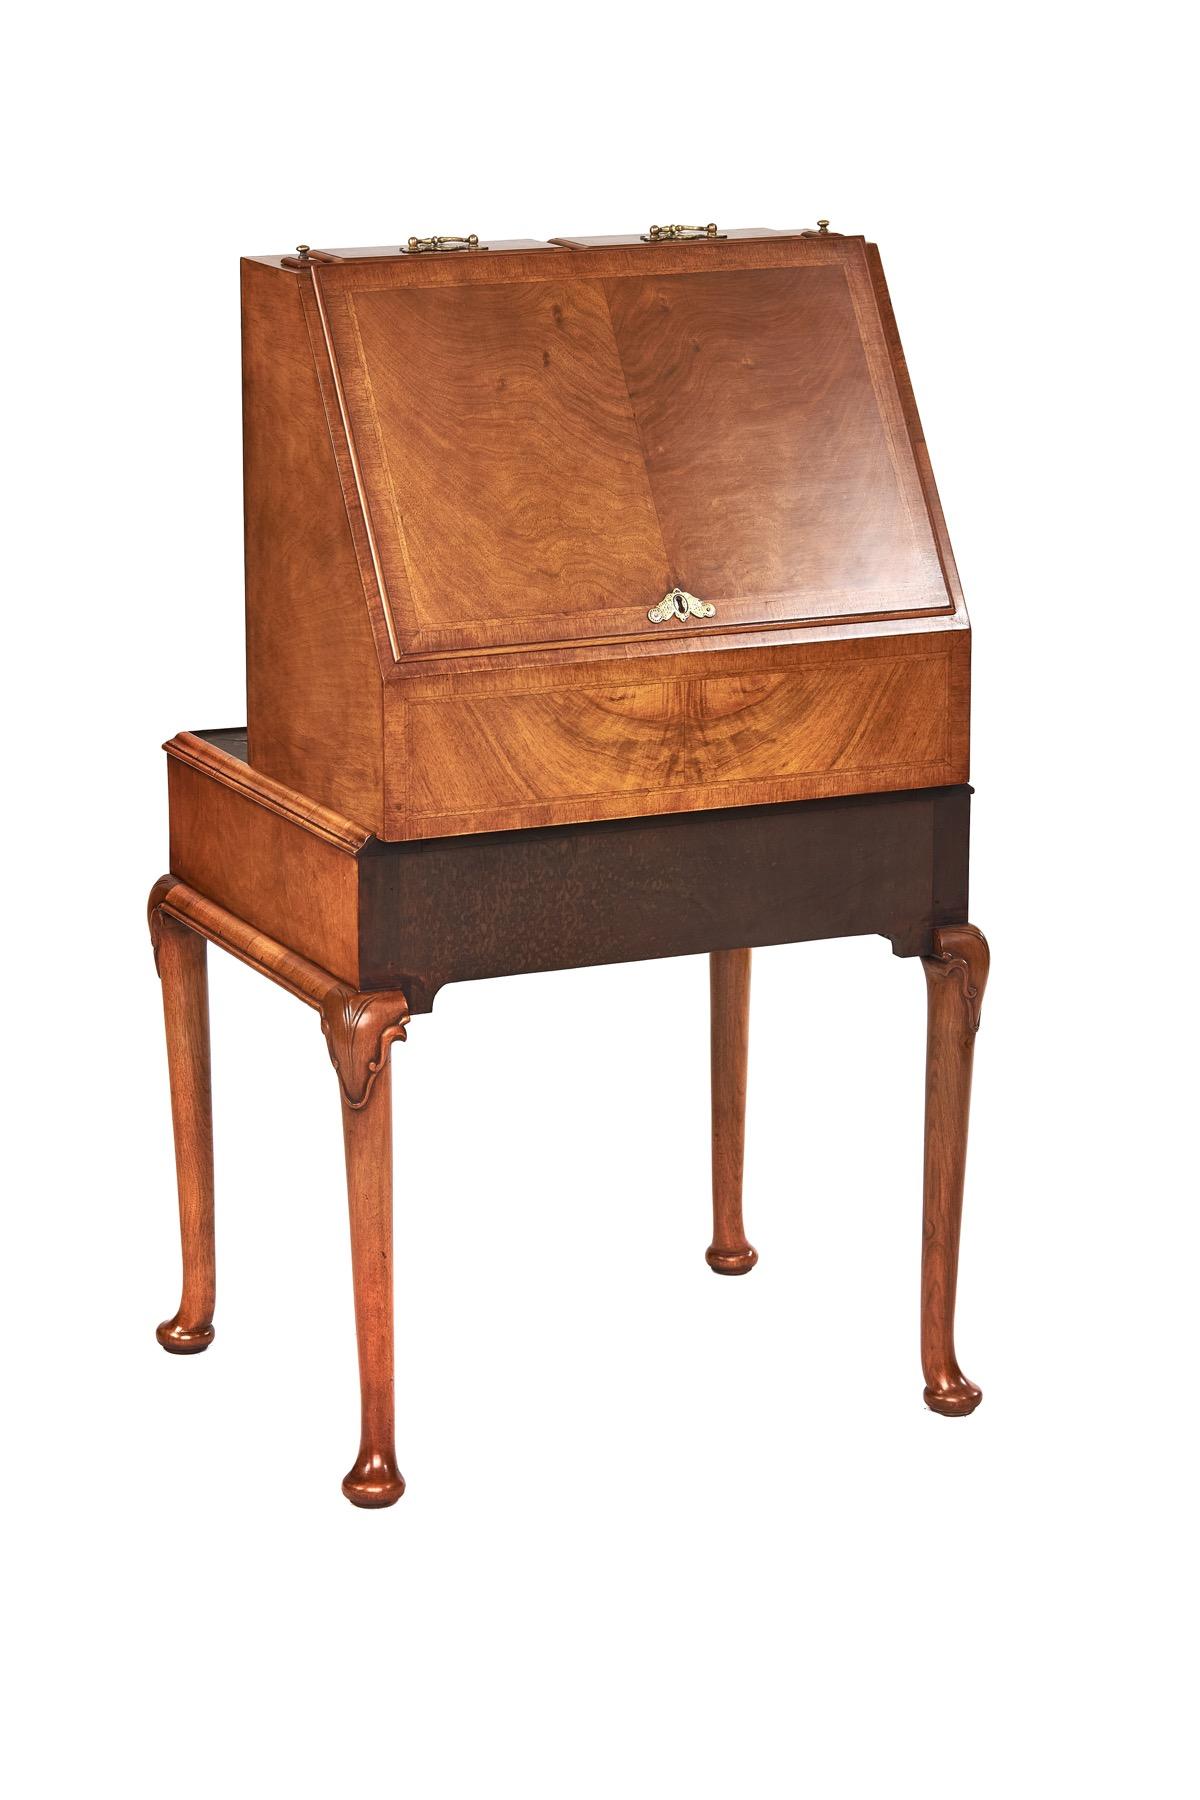 20th Century Queen Anne Walnut Revival Bureau on Stand, circa 1920s For Sale